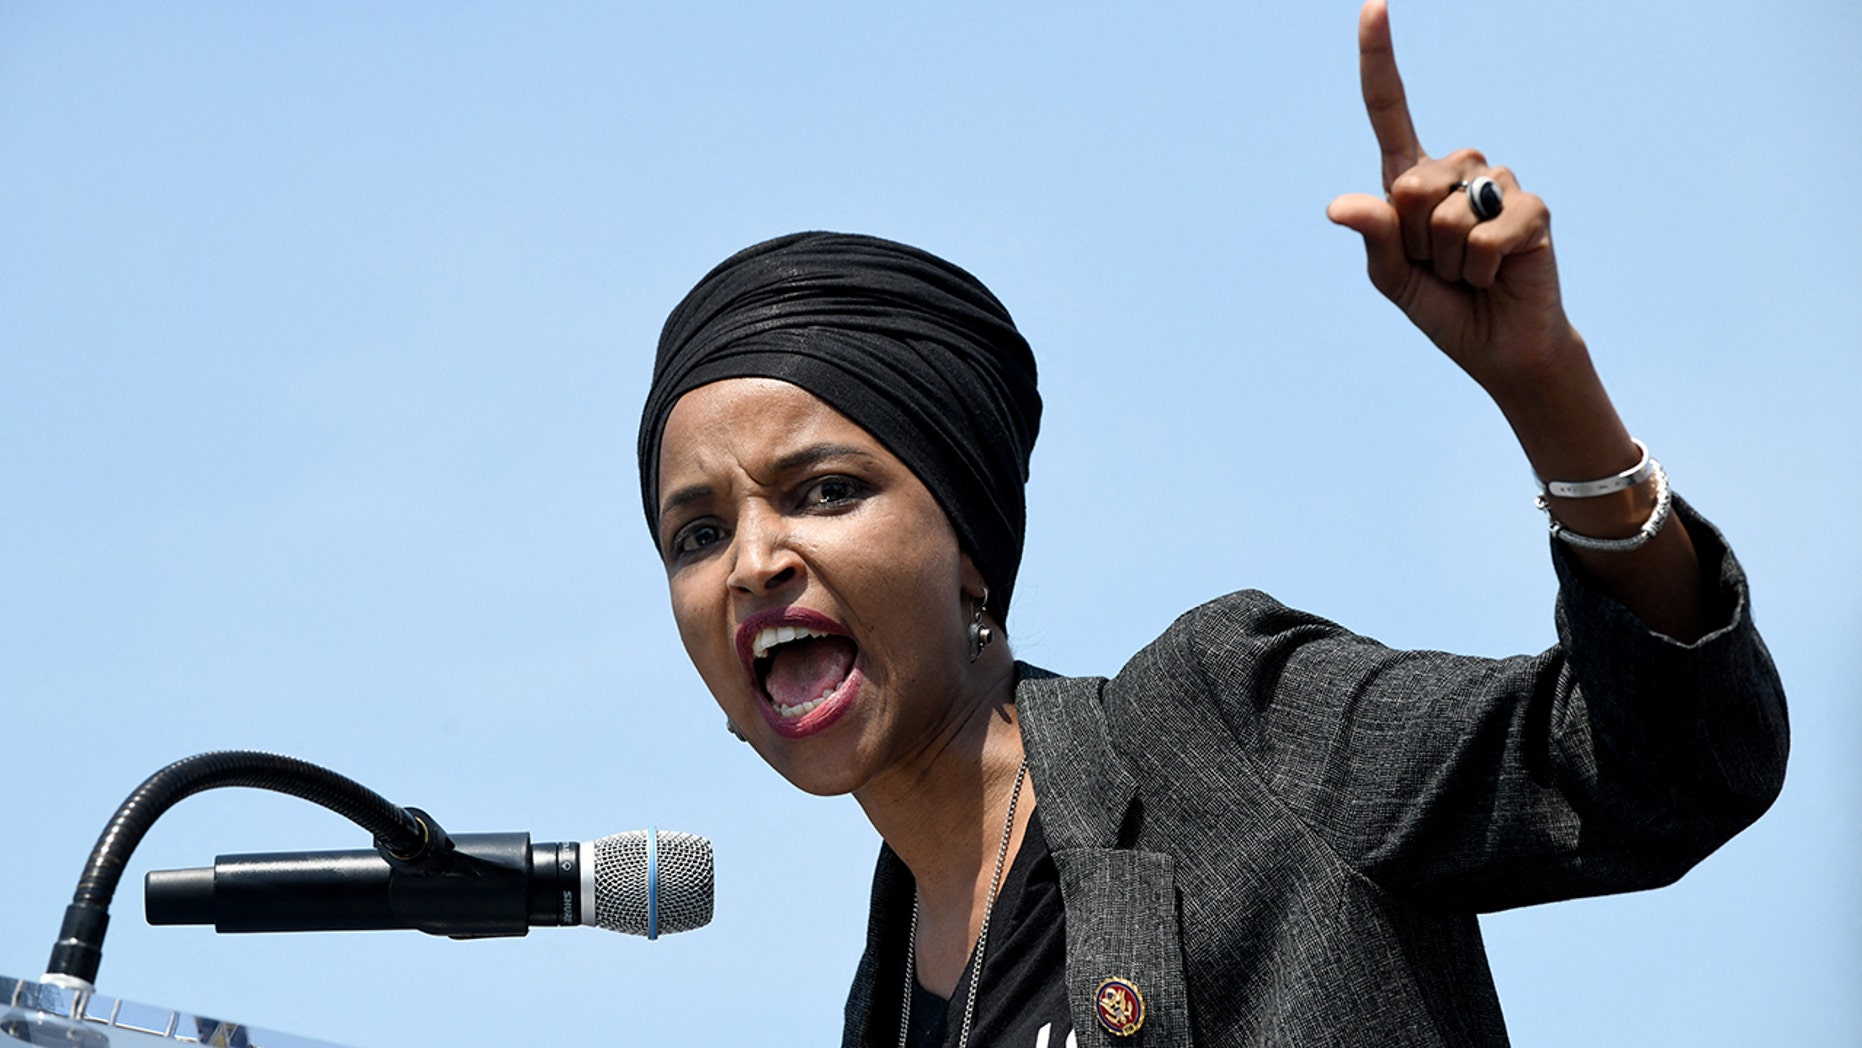 Ilhan Omar mocked for voicing outrage over Easter worship on plane: ‘Why do you hate Christians?’